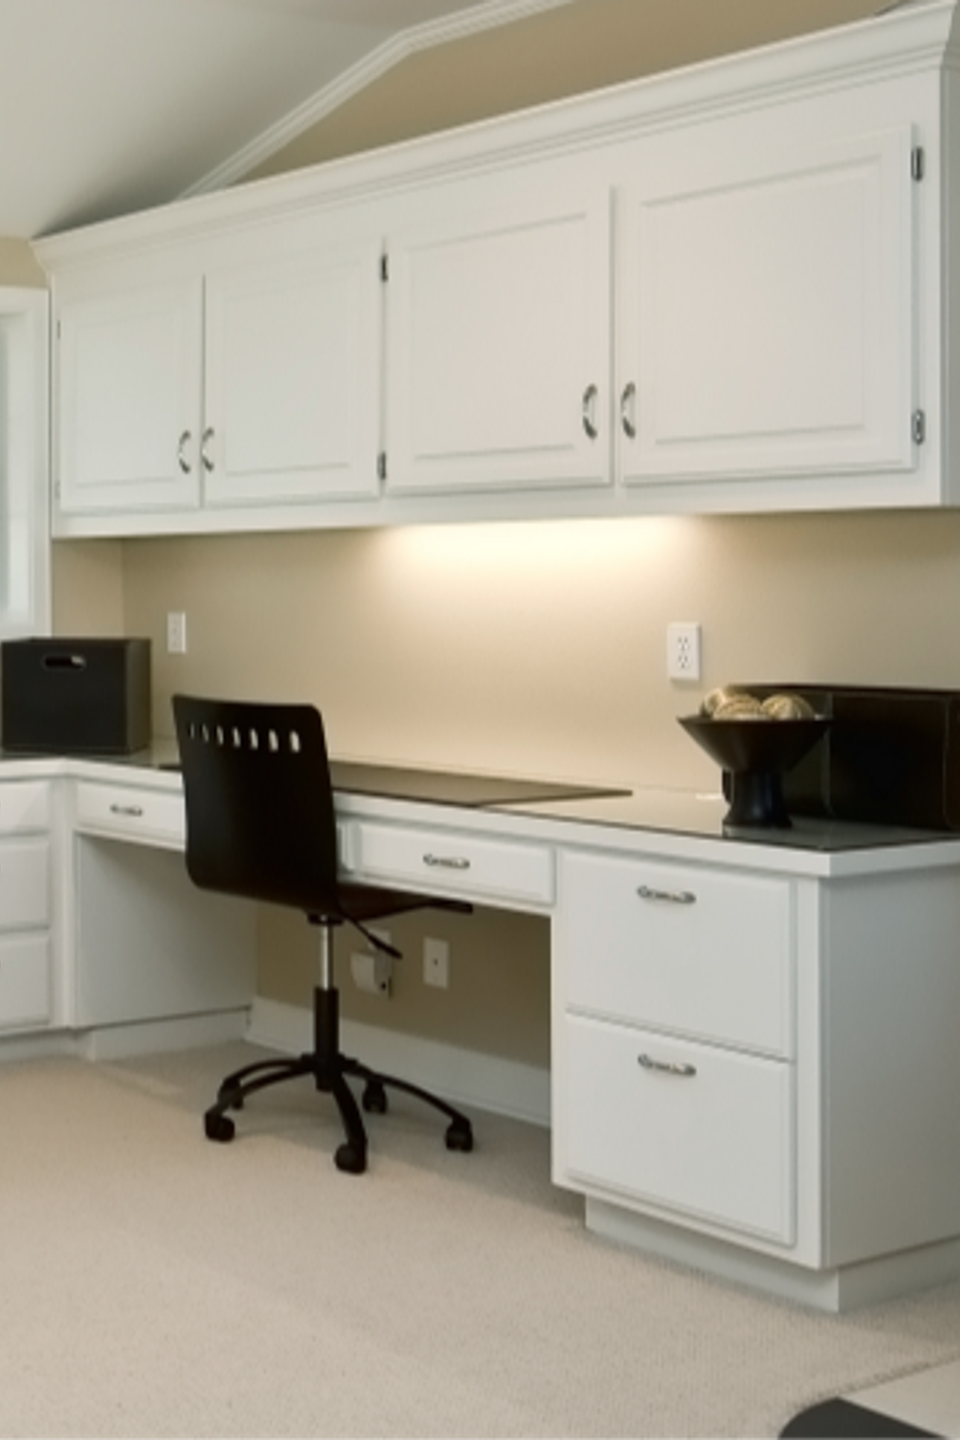 Commercial Cabinets & Fine Cabinetry Company, Garden Valley, ID